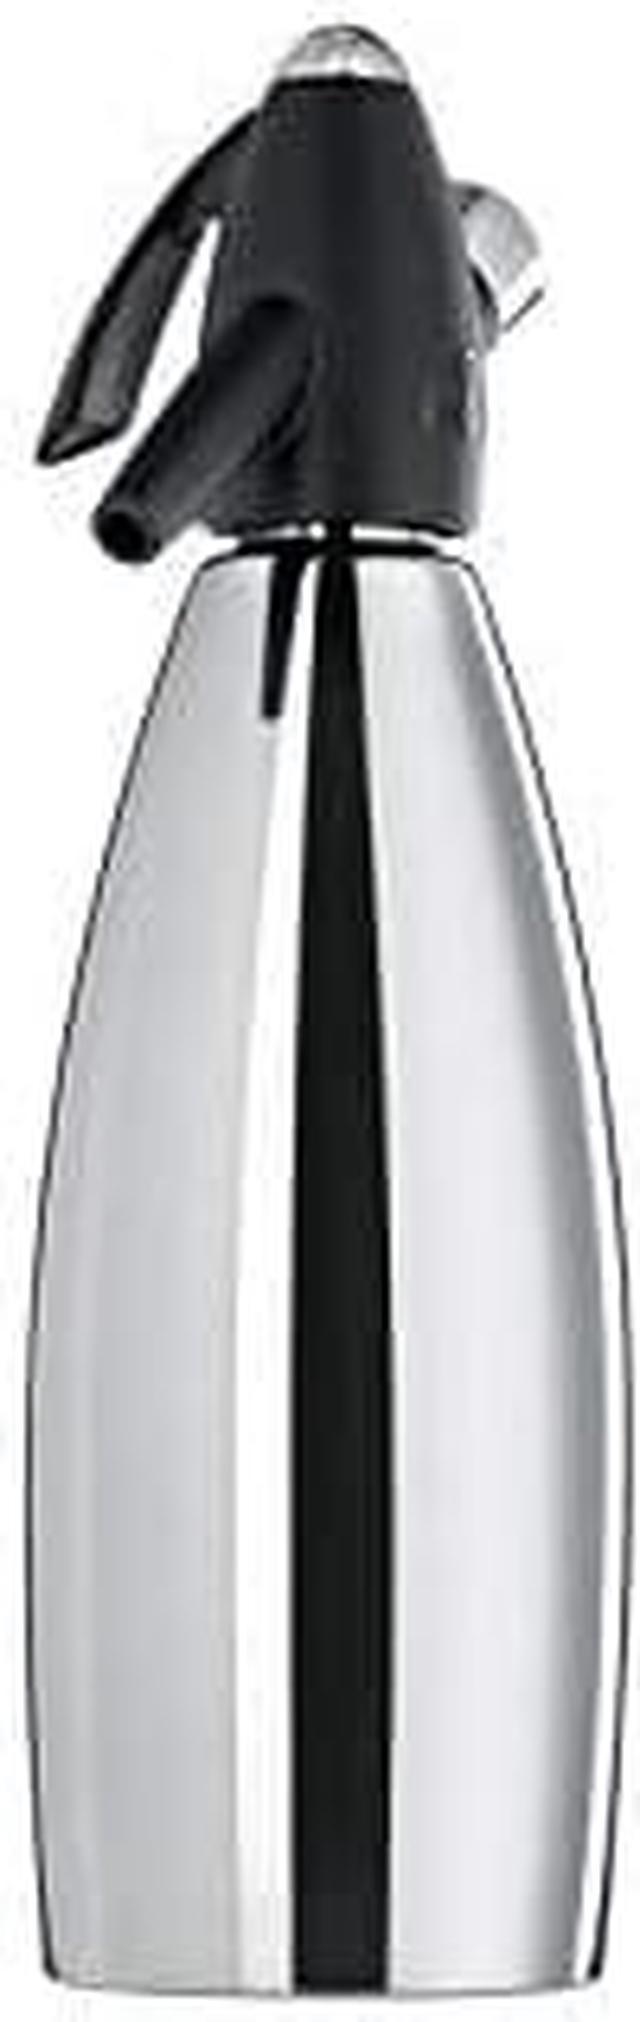 iSi Stainless Steel Soda Siphon, 1 Quart, Stainless 